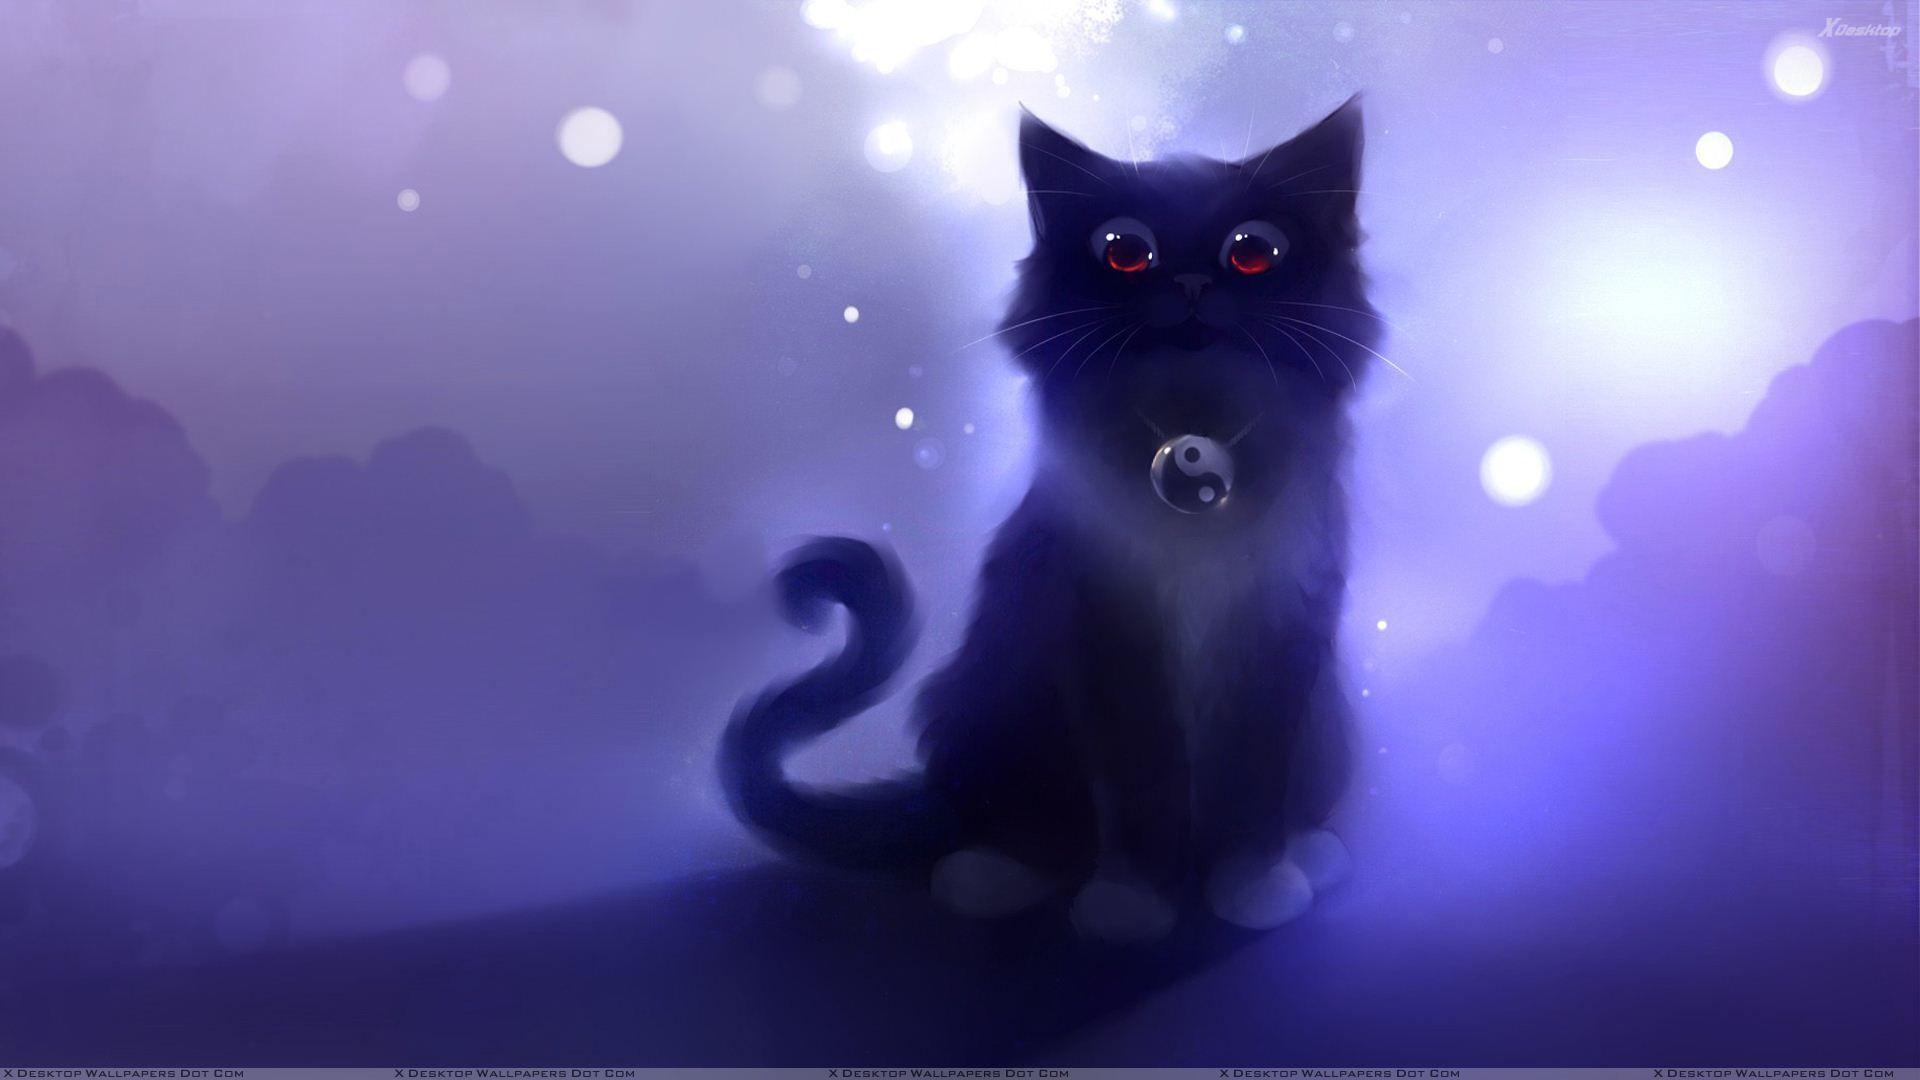 Black Cats Wallpaper, Photo & Image in HD